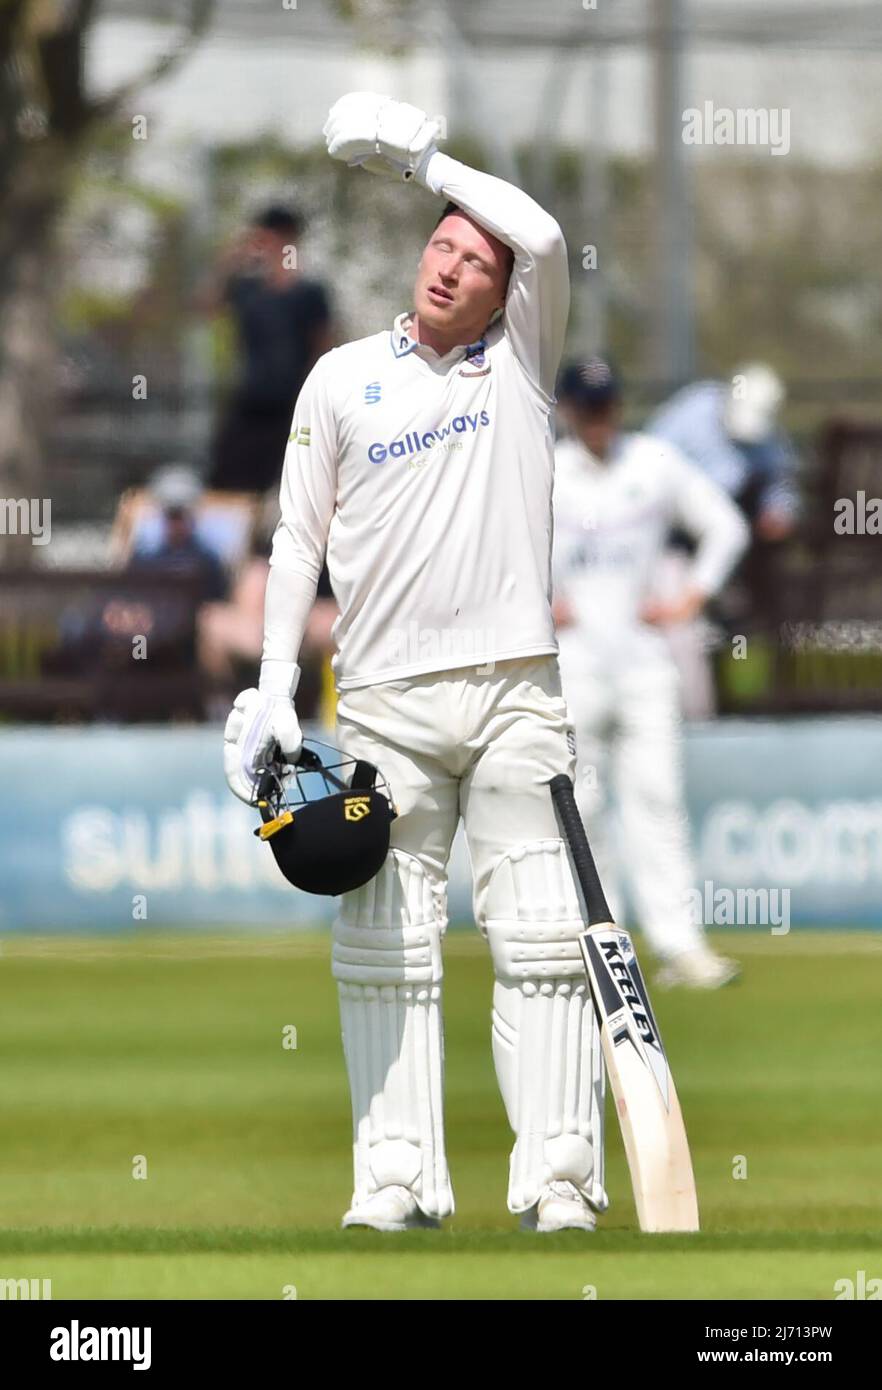 Hove UK 5th May 2022 - Tom Alsop batting for Sussex takes a breather against Middlesex on the first day of their LV= Insurance County Championship match at The 1st Central County Ground  in Hove . : Credit Simon Dack / Alamy Live News Stock Photo